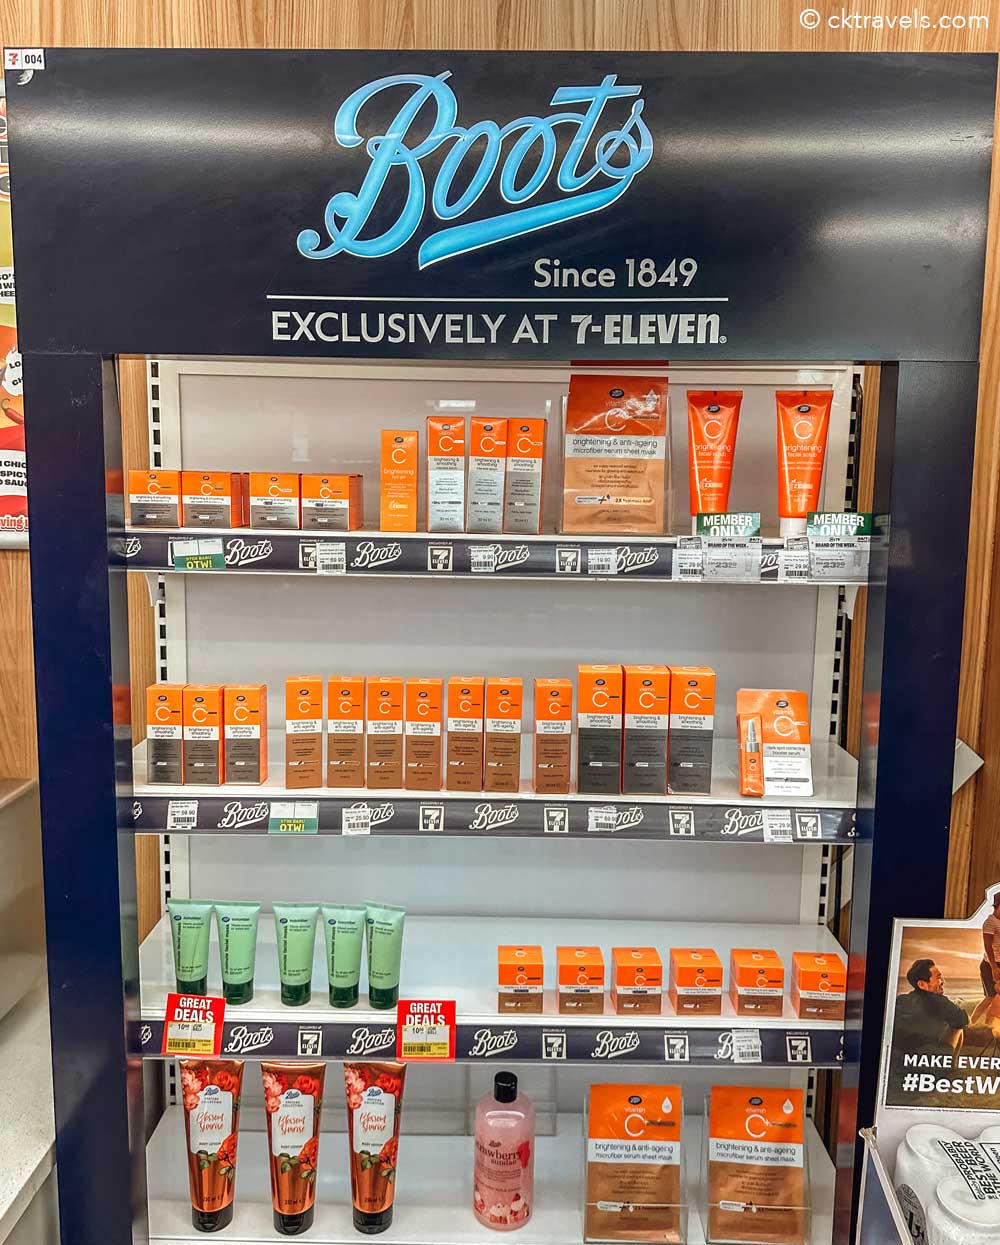 Malaysia 7-Eleven Stores - Boots products